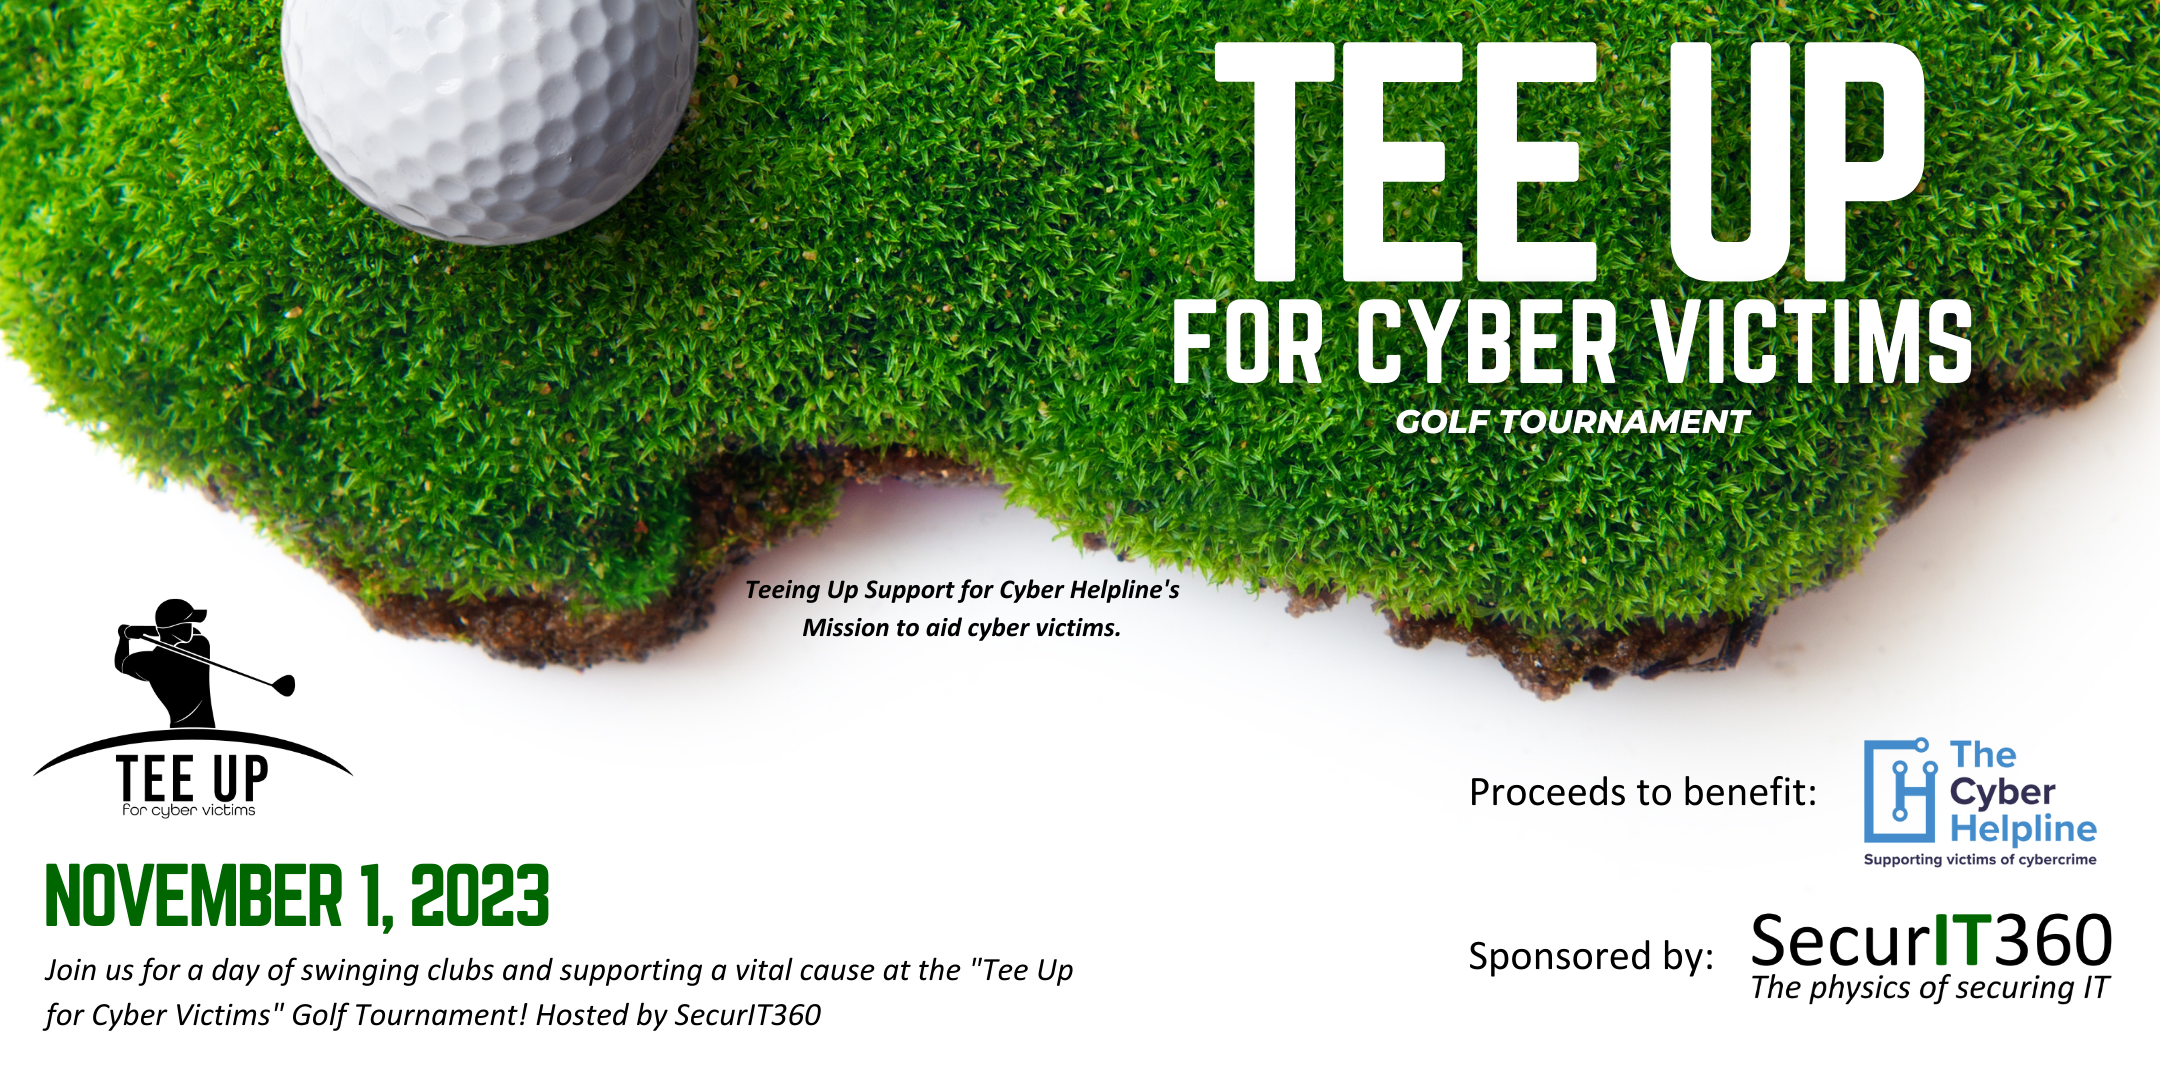 Tee Up for Cyber Victims